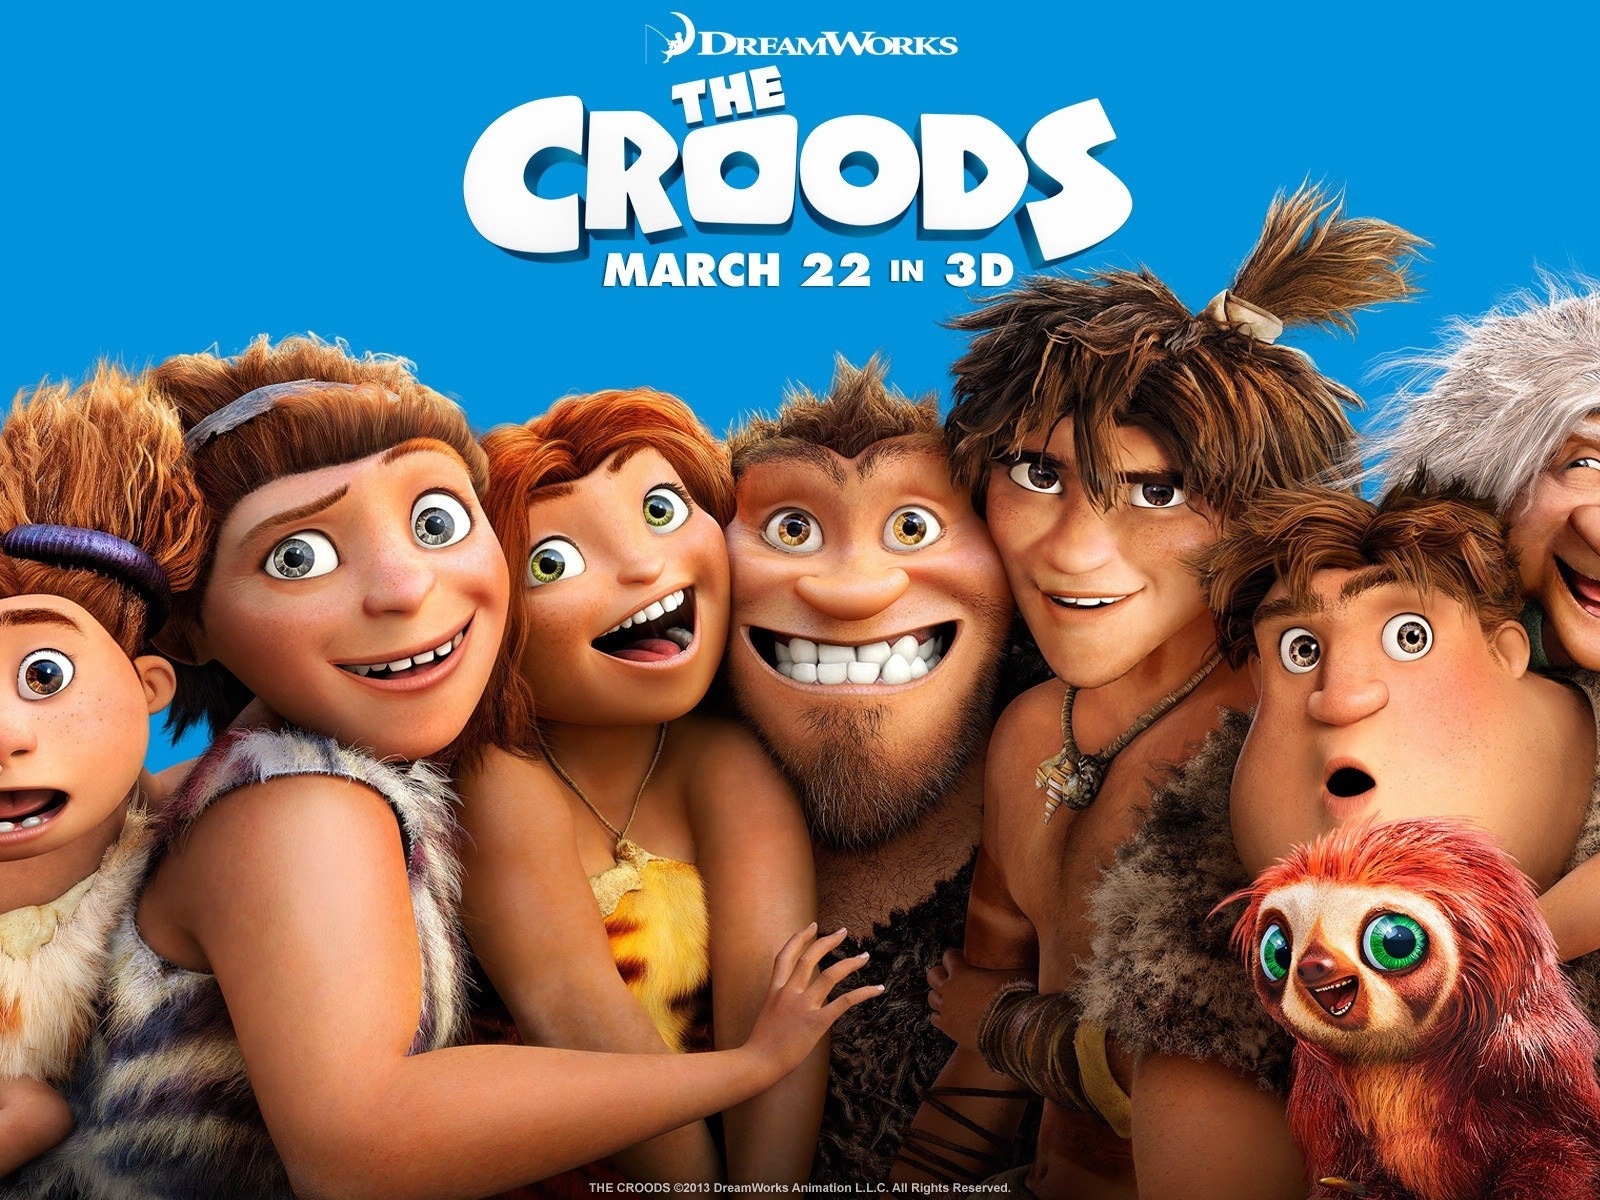 The Croods HD movie wallpapers #3 - 1600x1200